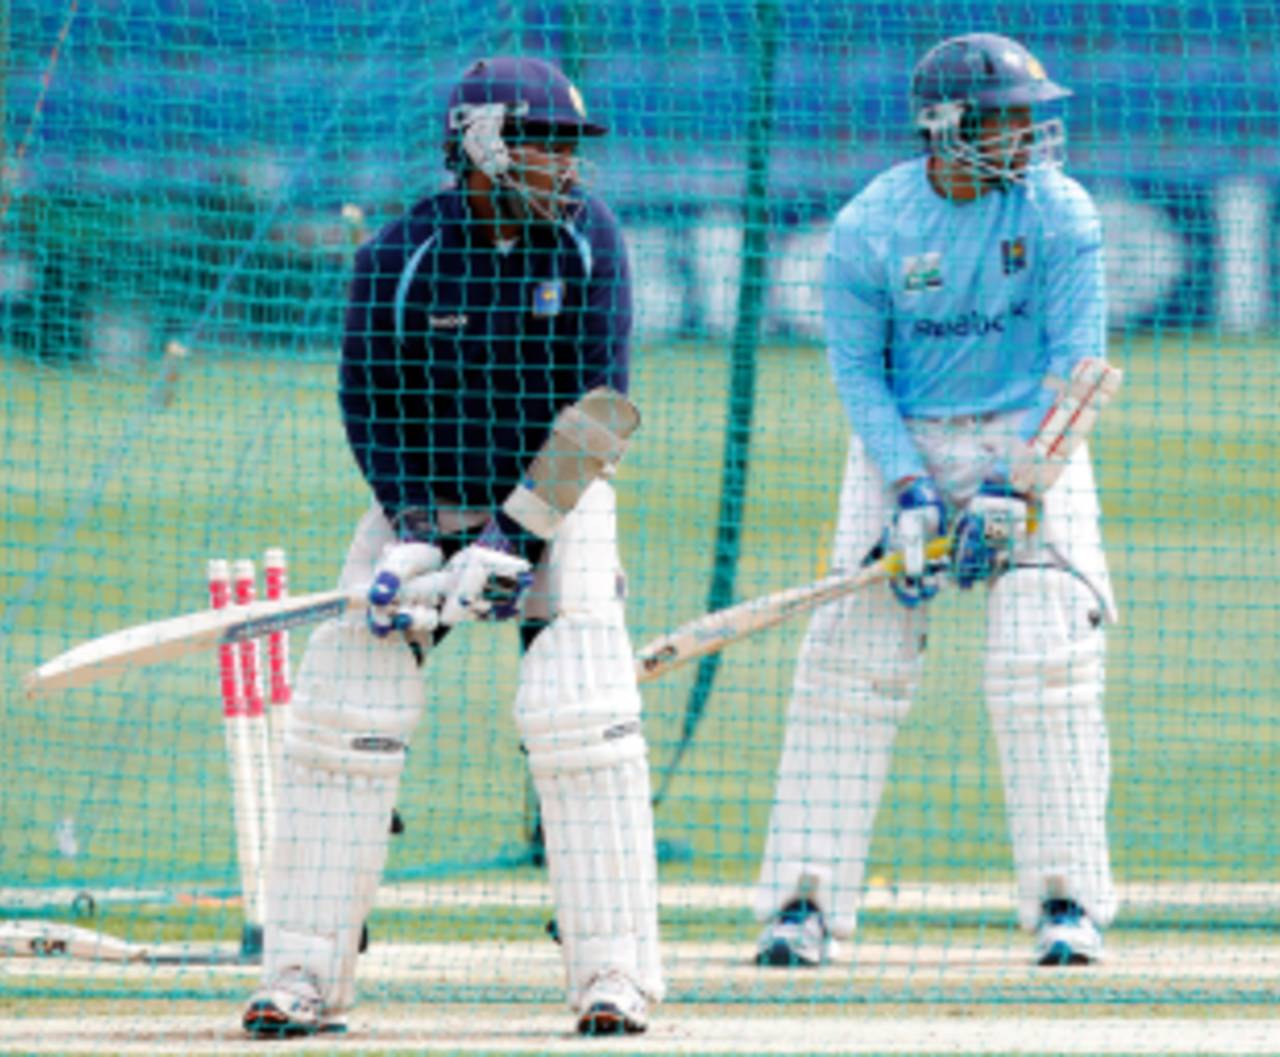 Mahela Jayawardene and Tillakaratne Dilshan do some work in the nets ahead of the first Test, Cardiff, May 25 2011